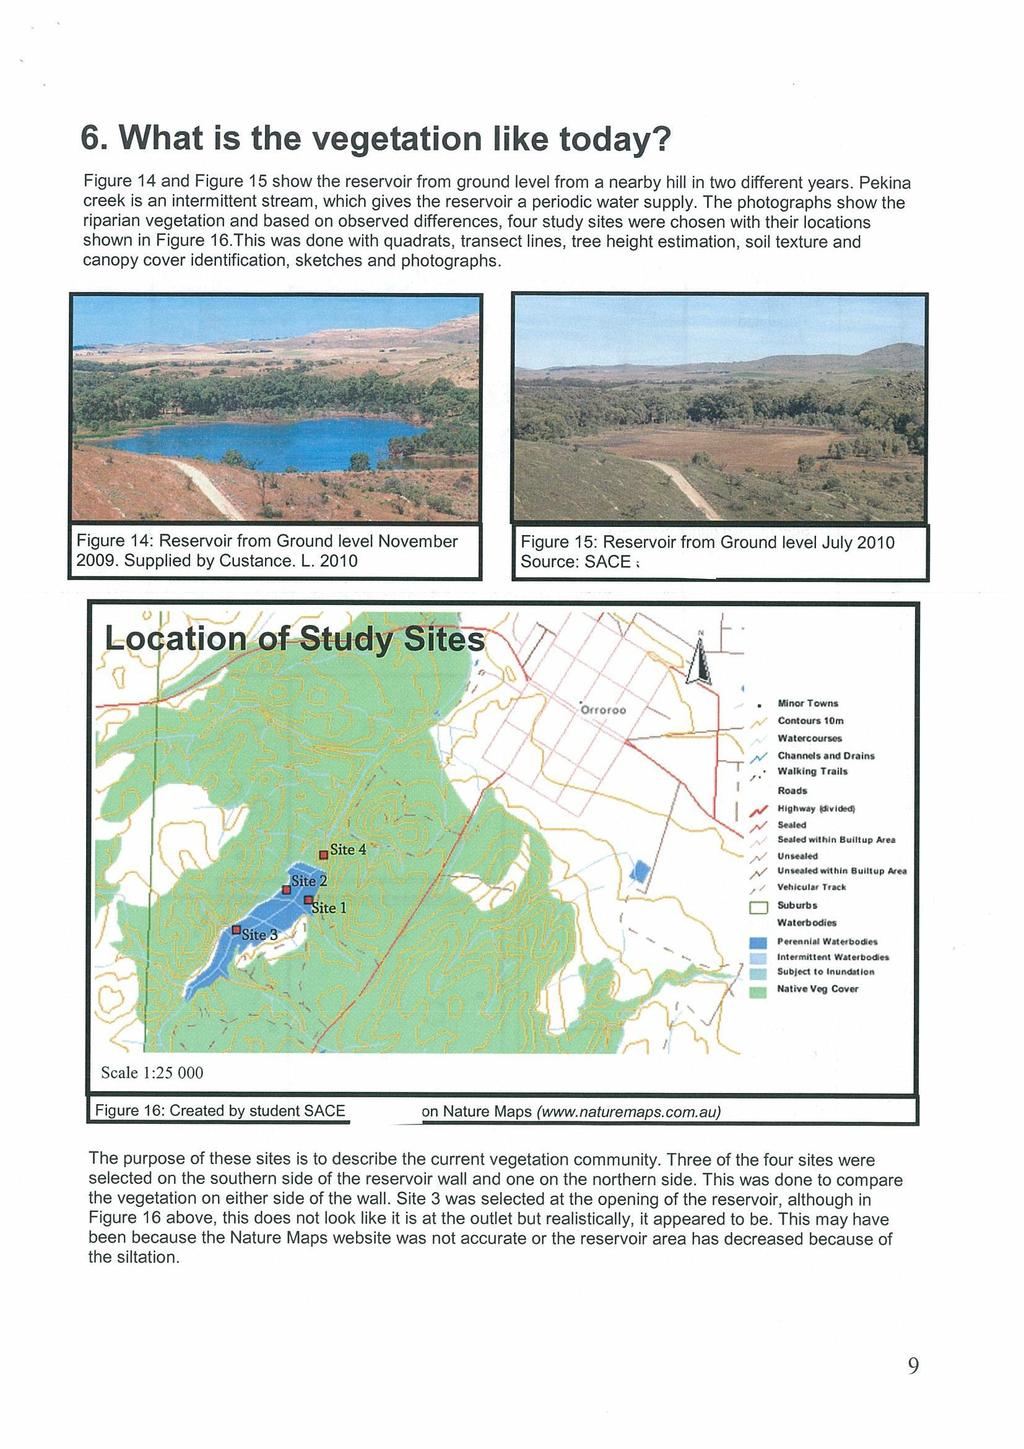 Figure 14: Reservoir from Ground level November 2009. Supplied by Student 2010.